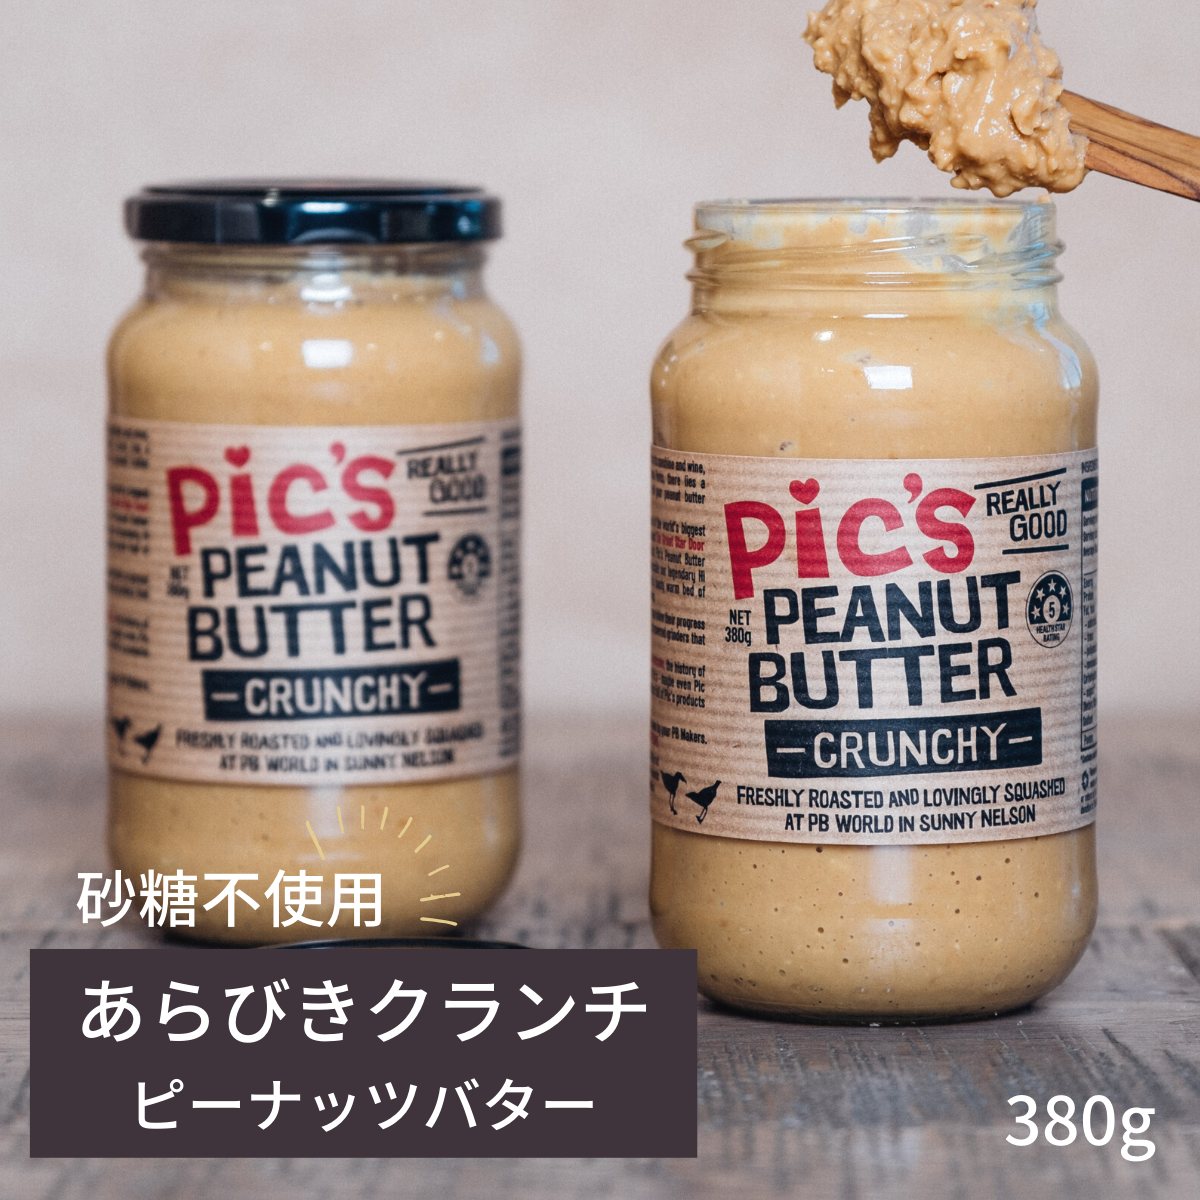  pick s peanuts butter oh .. Clan chi380g less sugar food additive un- use salt New Zealand production Pic's Peanut Butter